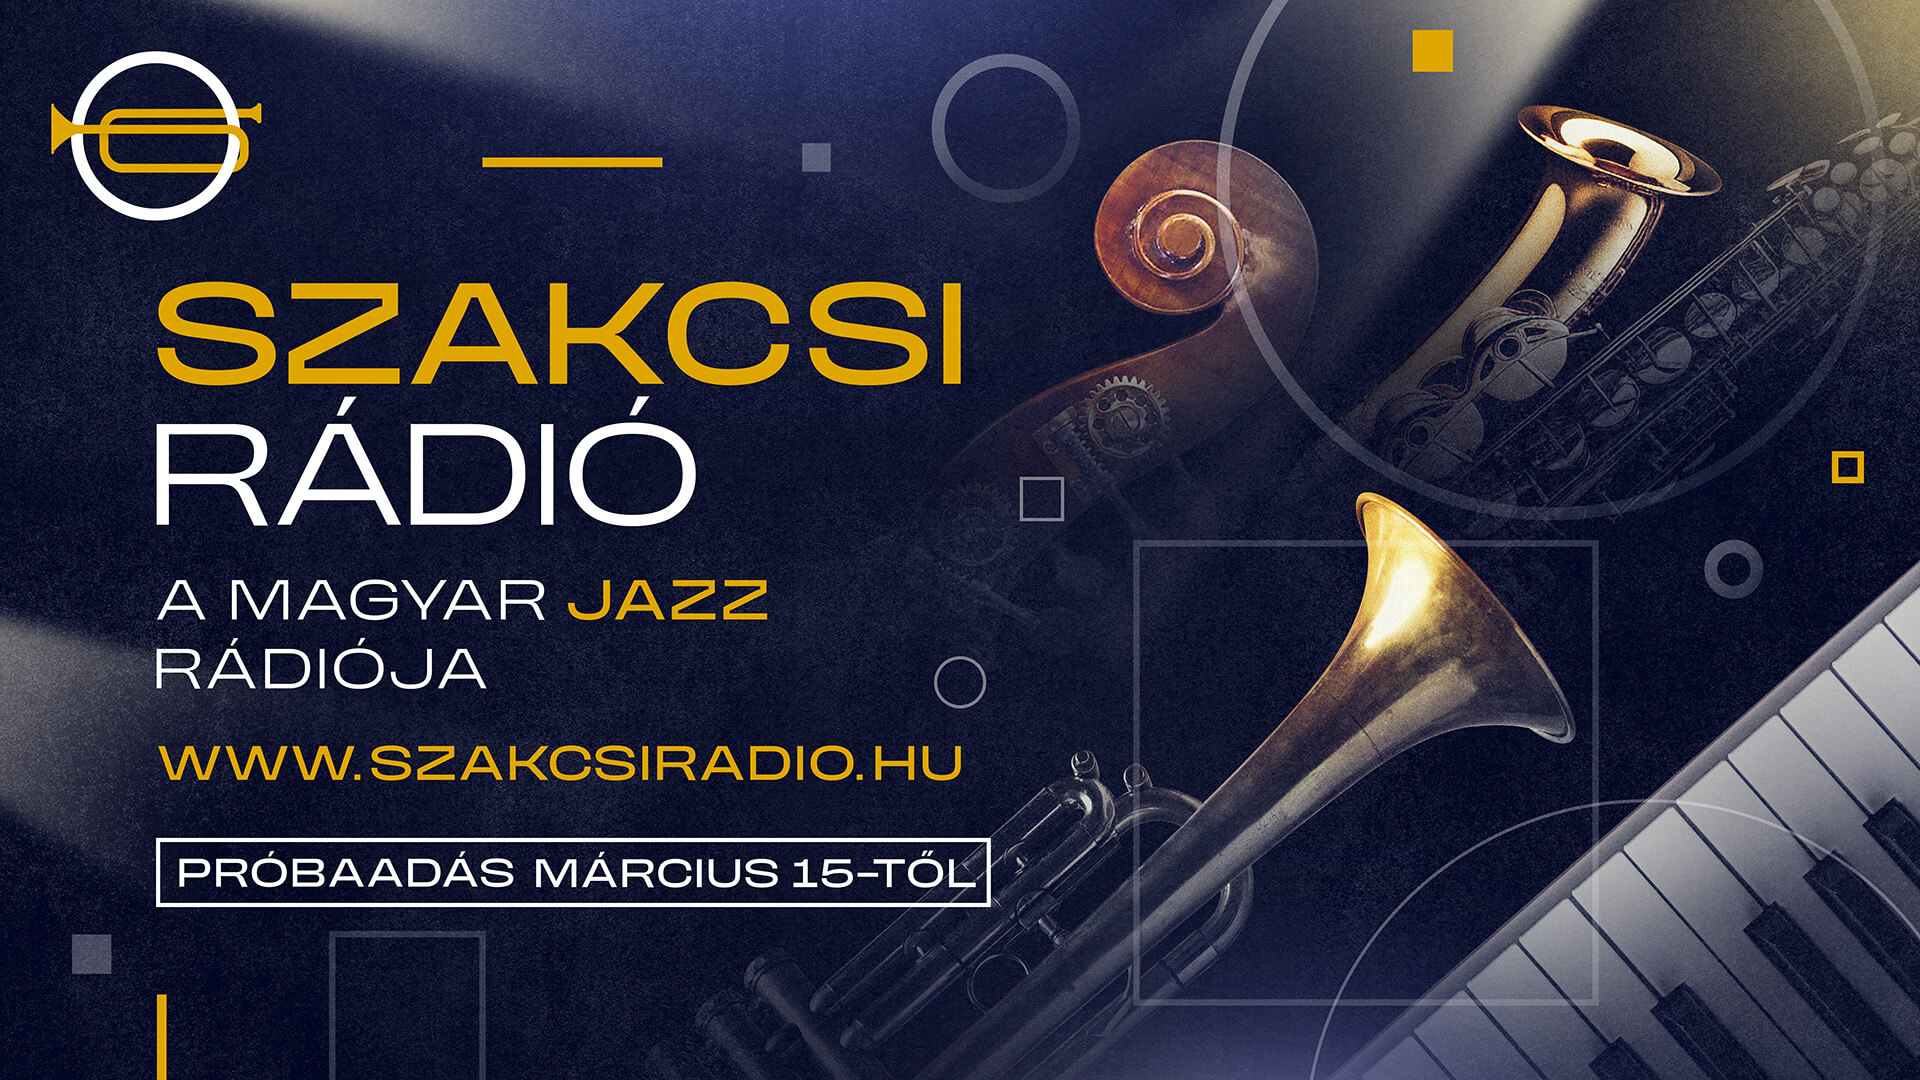 Non-Stop Online Jazz Radio Station to be Launched in Hungary